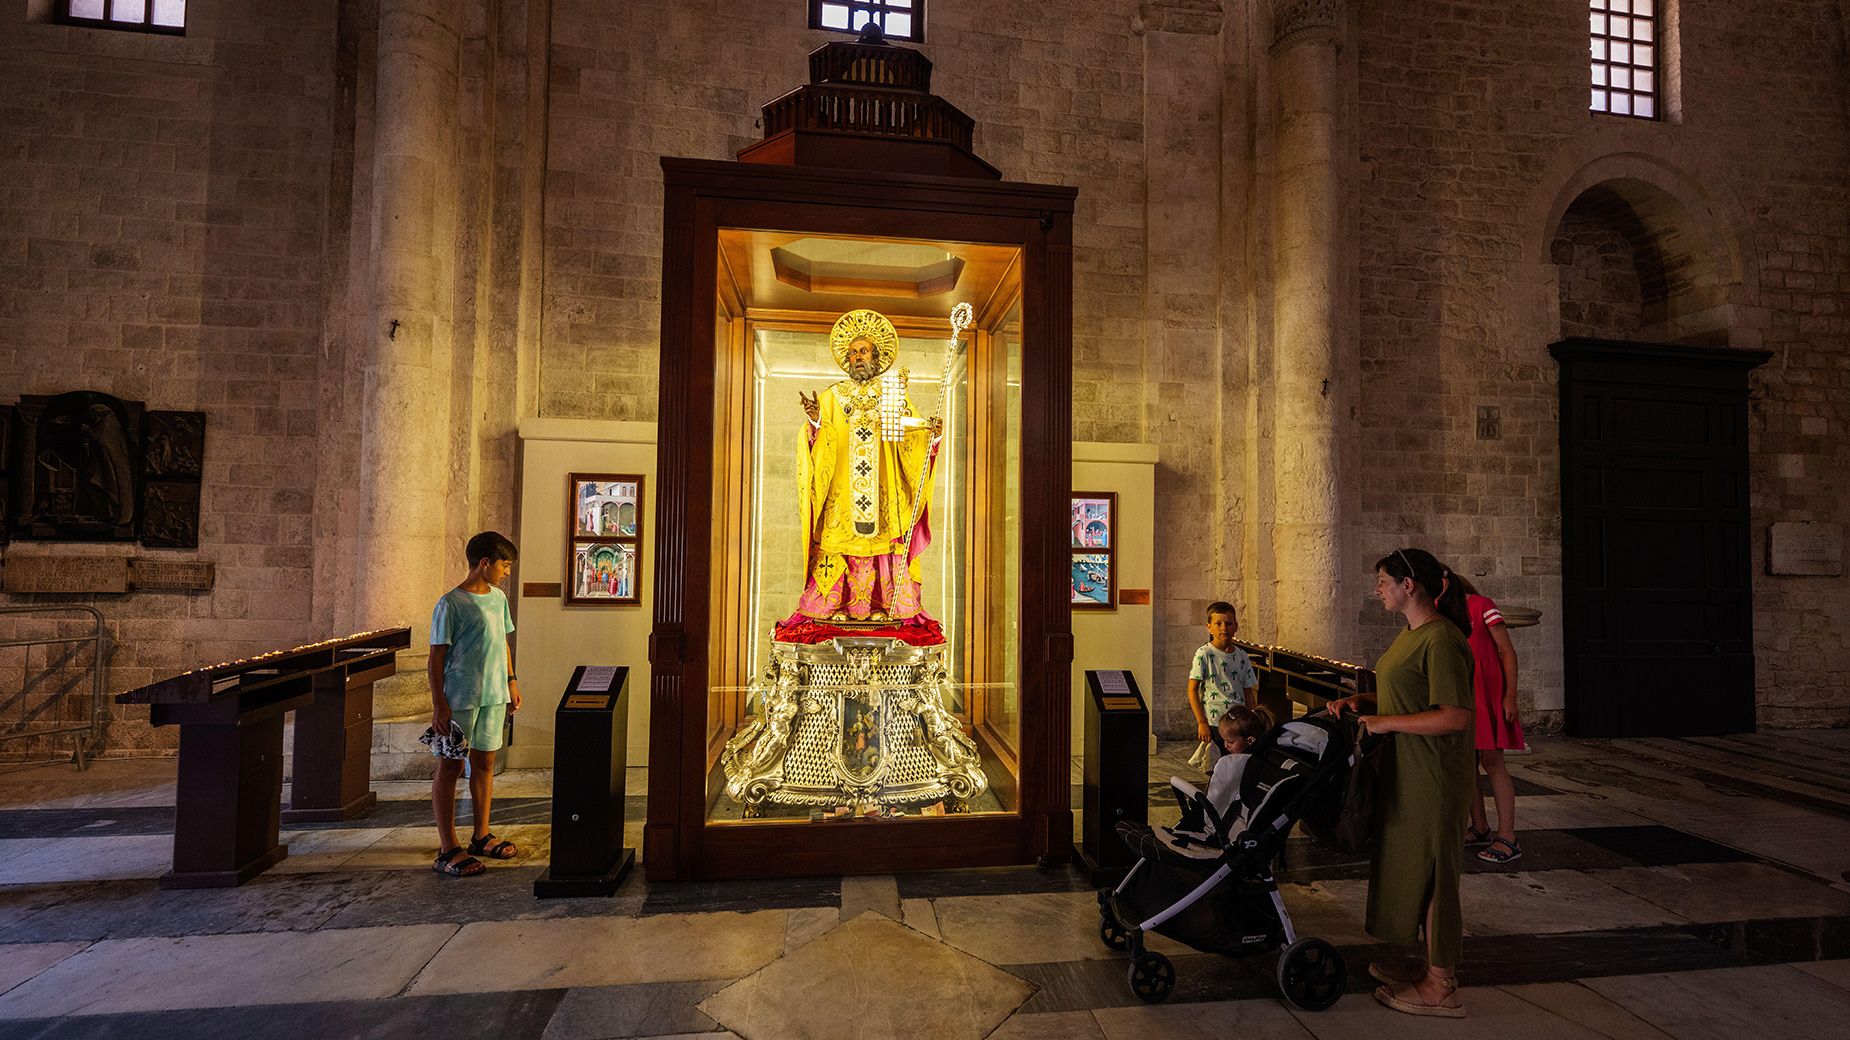 The Basilica di San Nicola in Bari, which houses the remains of Saint Nicholas, is a pilgrimage destination for Christians from all over the world.